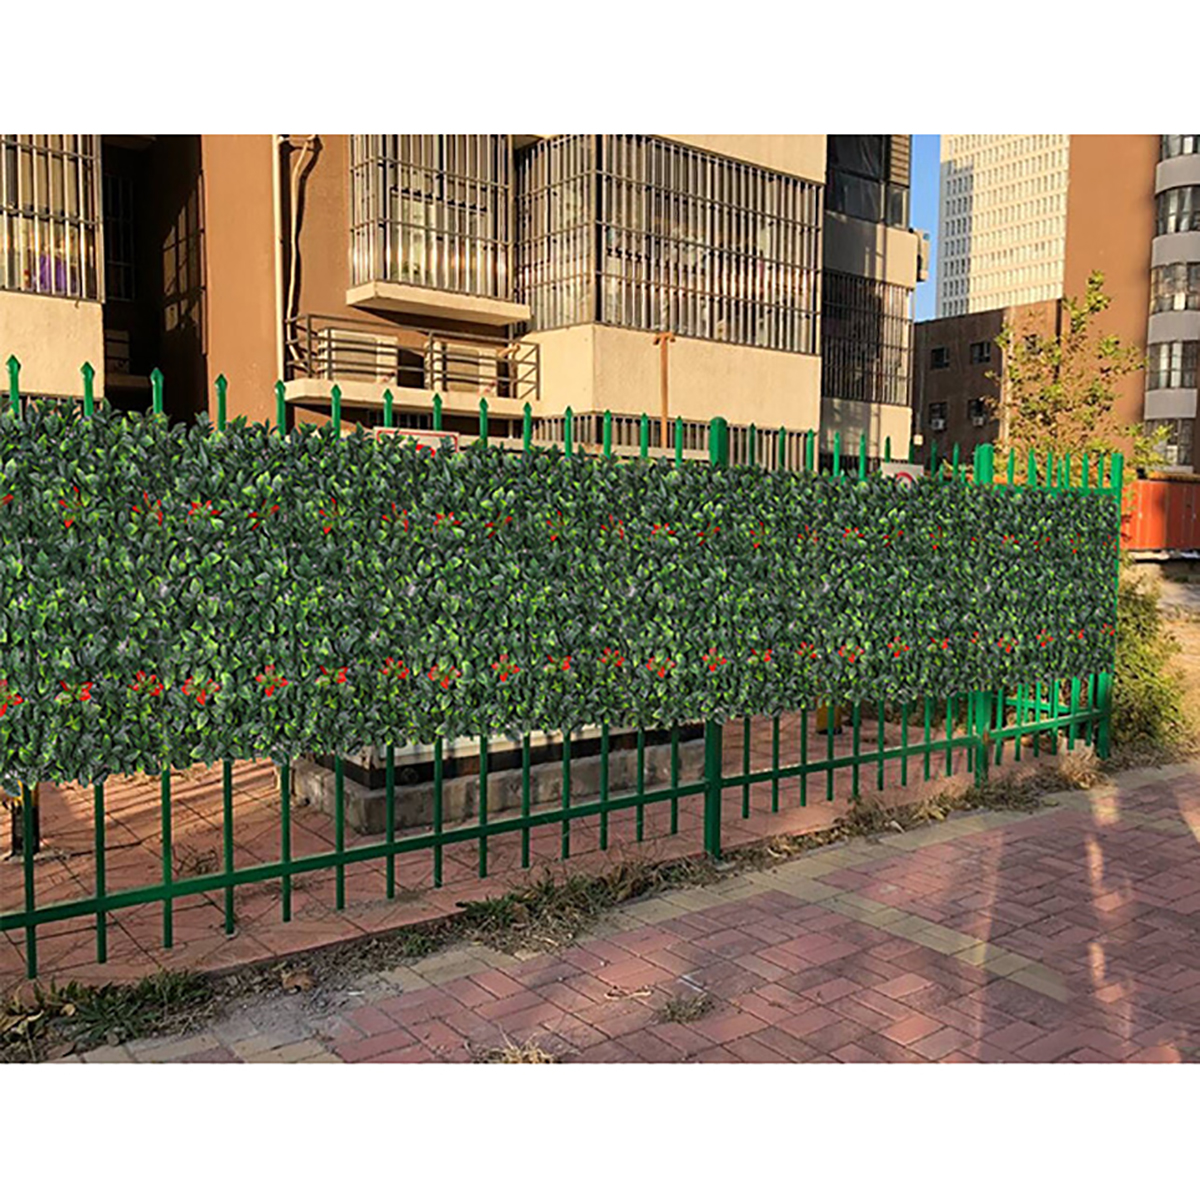 4060CM-Artificial-Topiary-Hedges-Panels-Plastic-Faux-Shrubs-Fence-Mat-Greenery-Wall-Backdrop-Decor-G-1729461-7